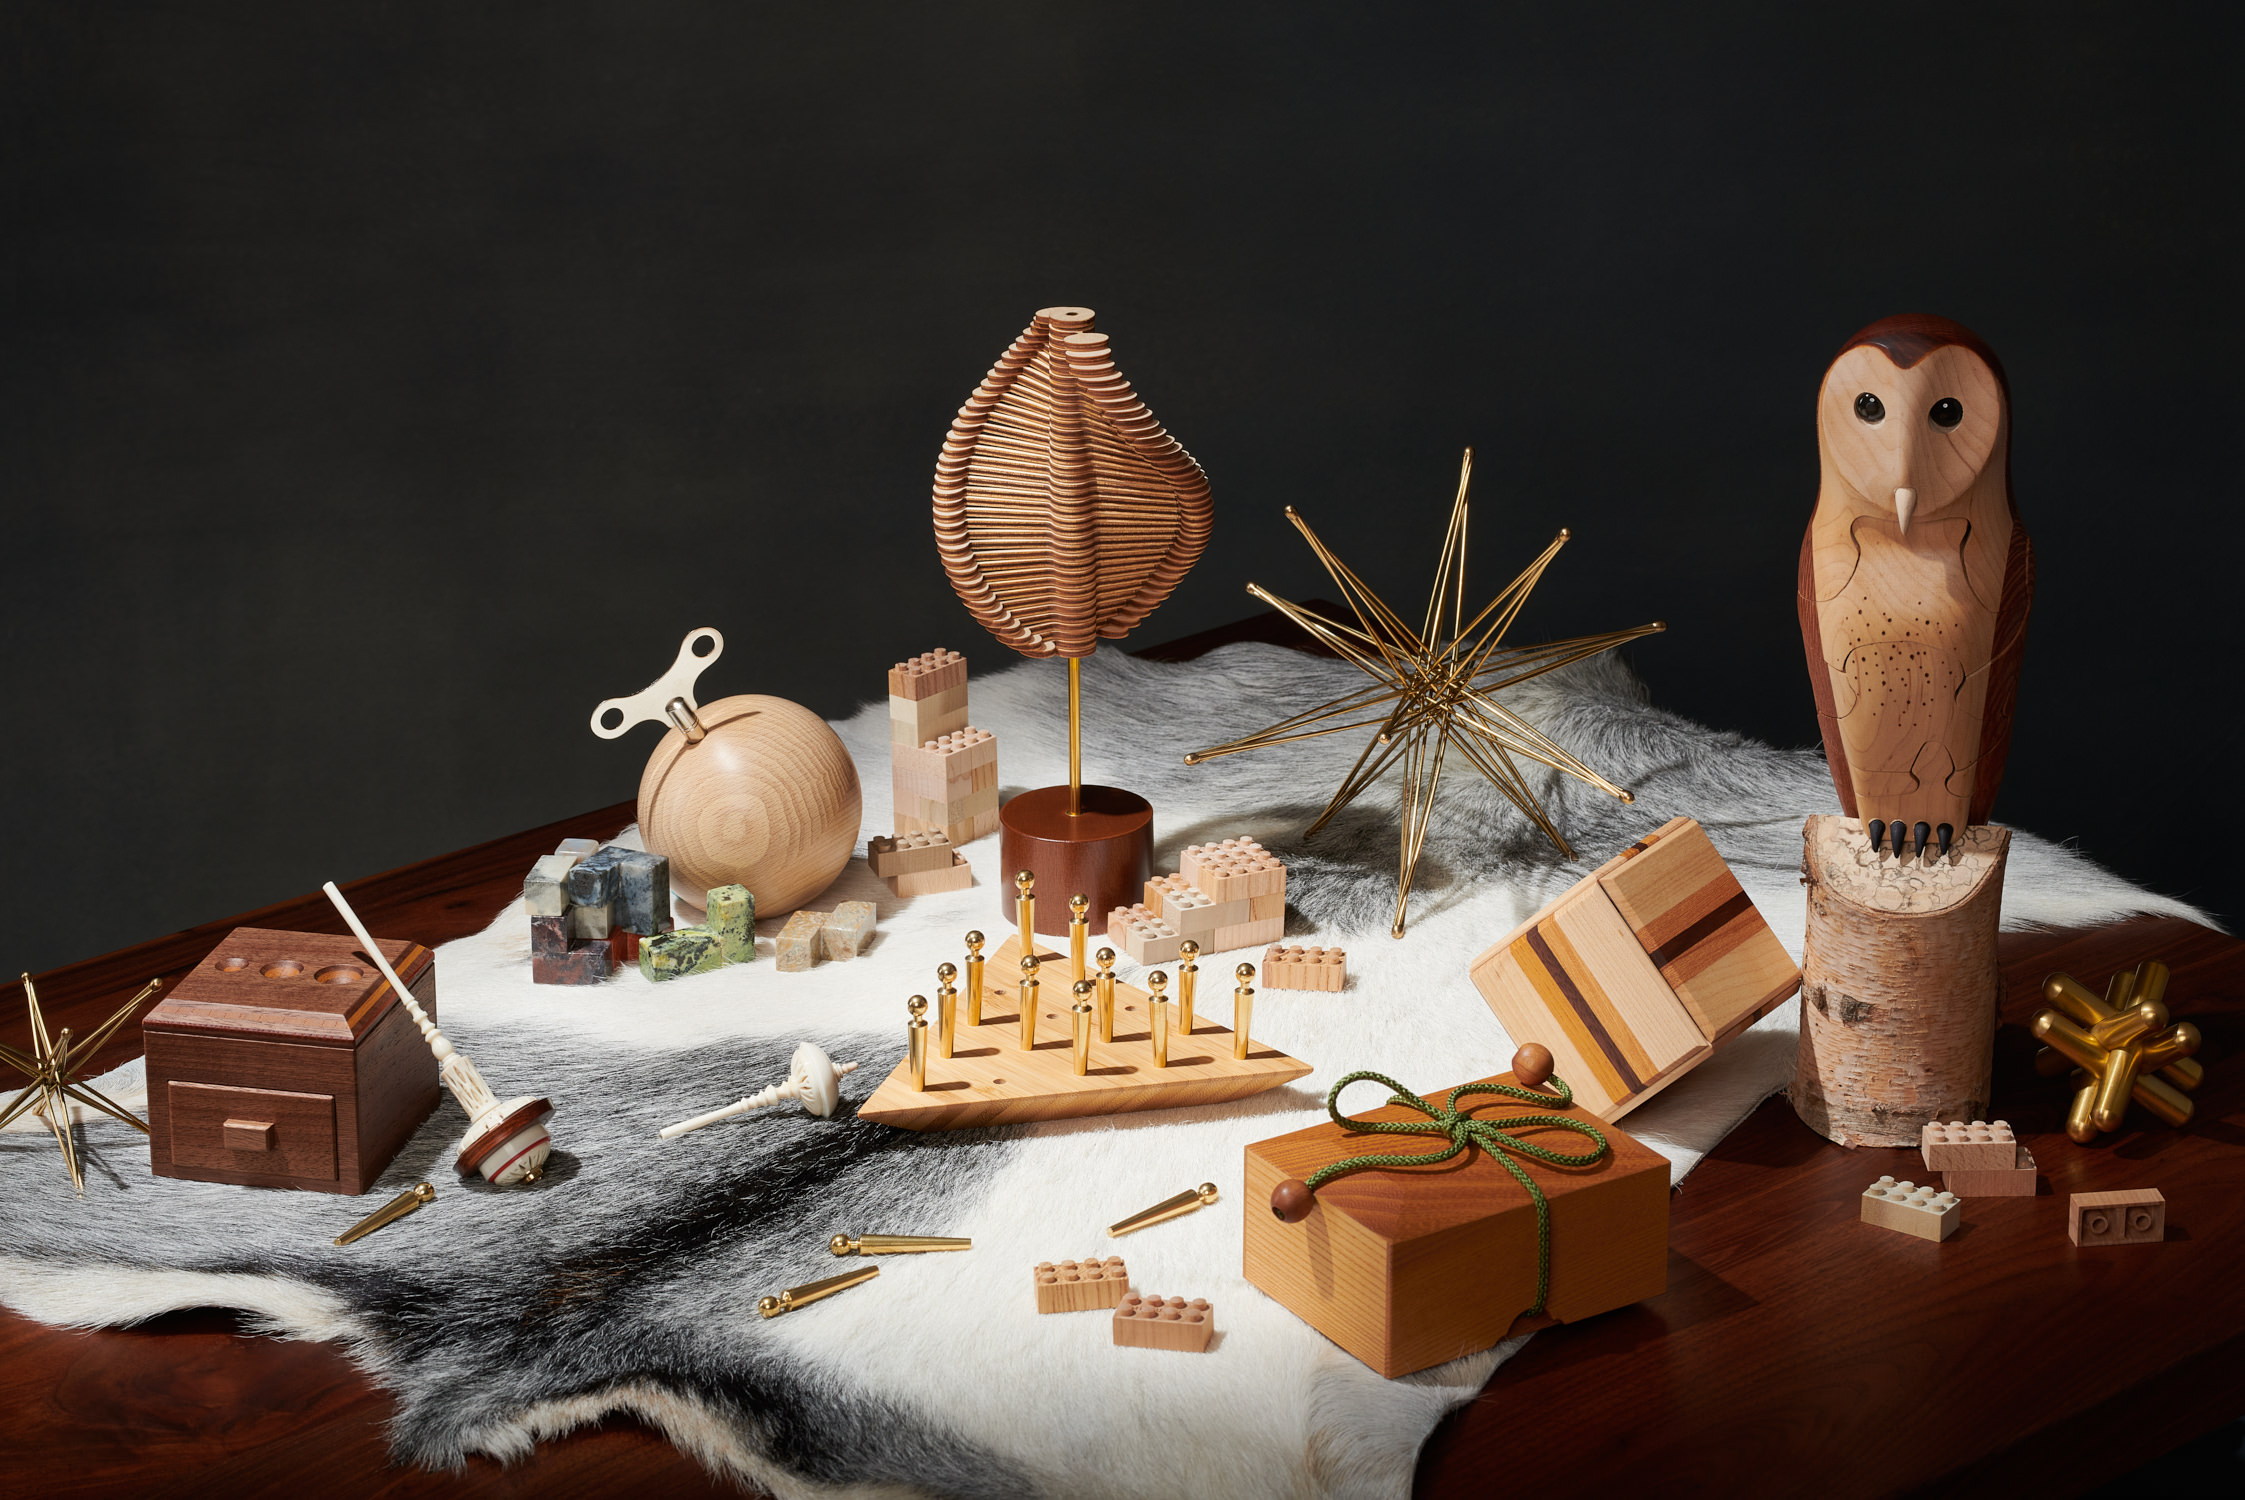 Art of Play Puzzles and Games by Matthew Roharik Luxury Product Photographer Los Angeles 